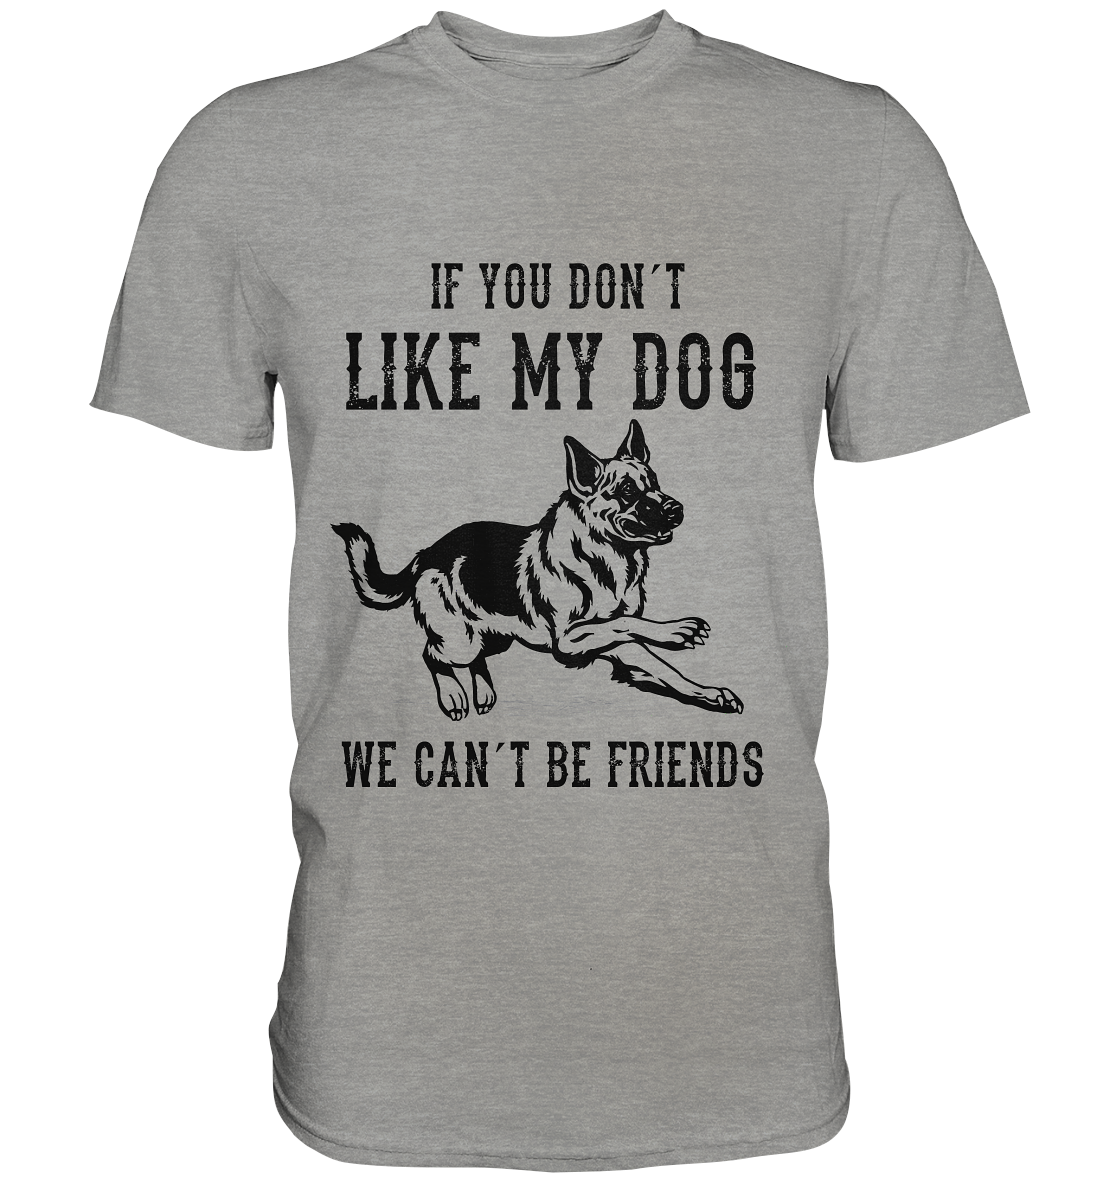 If you don´t like my dog, we can´t be friends. Schäferhund - Premium Shirt